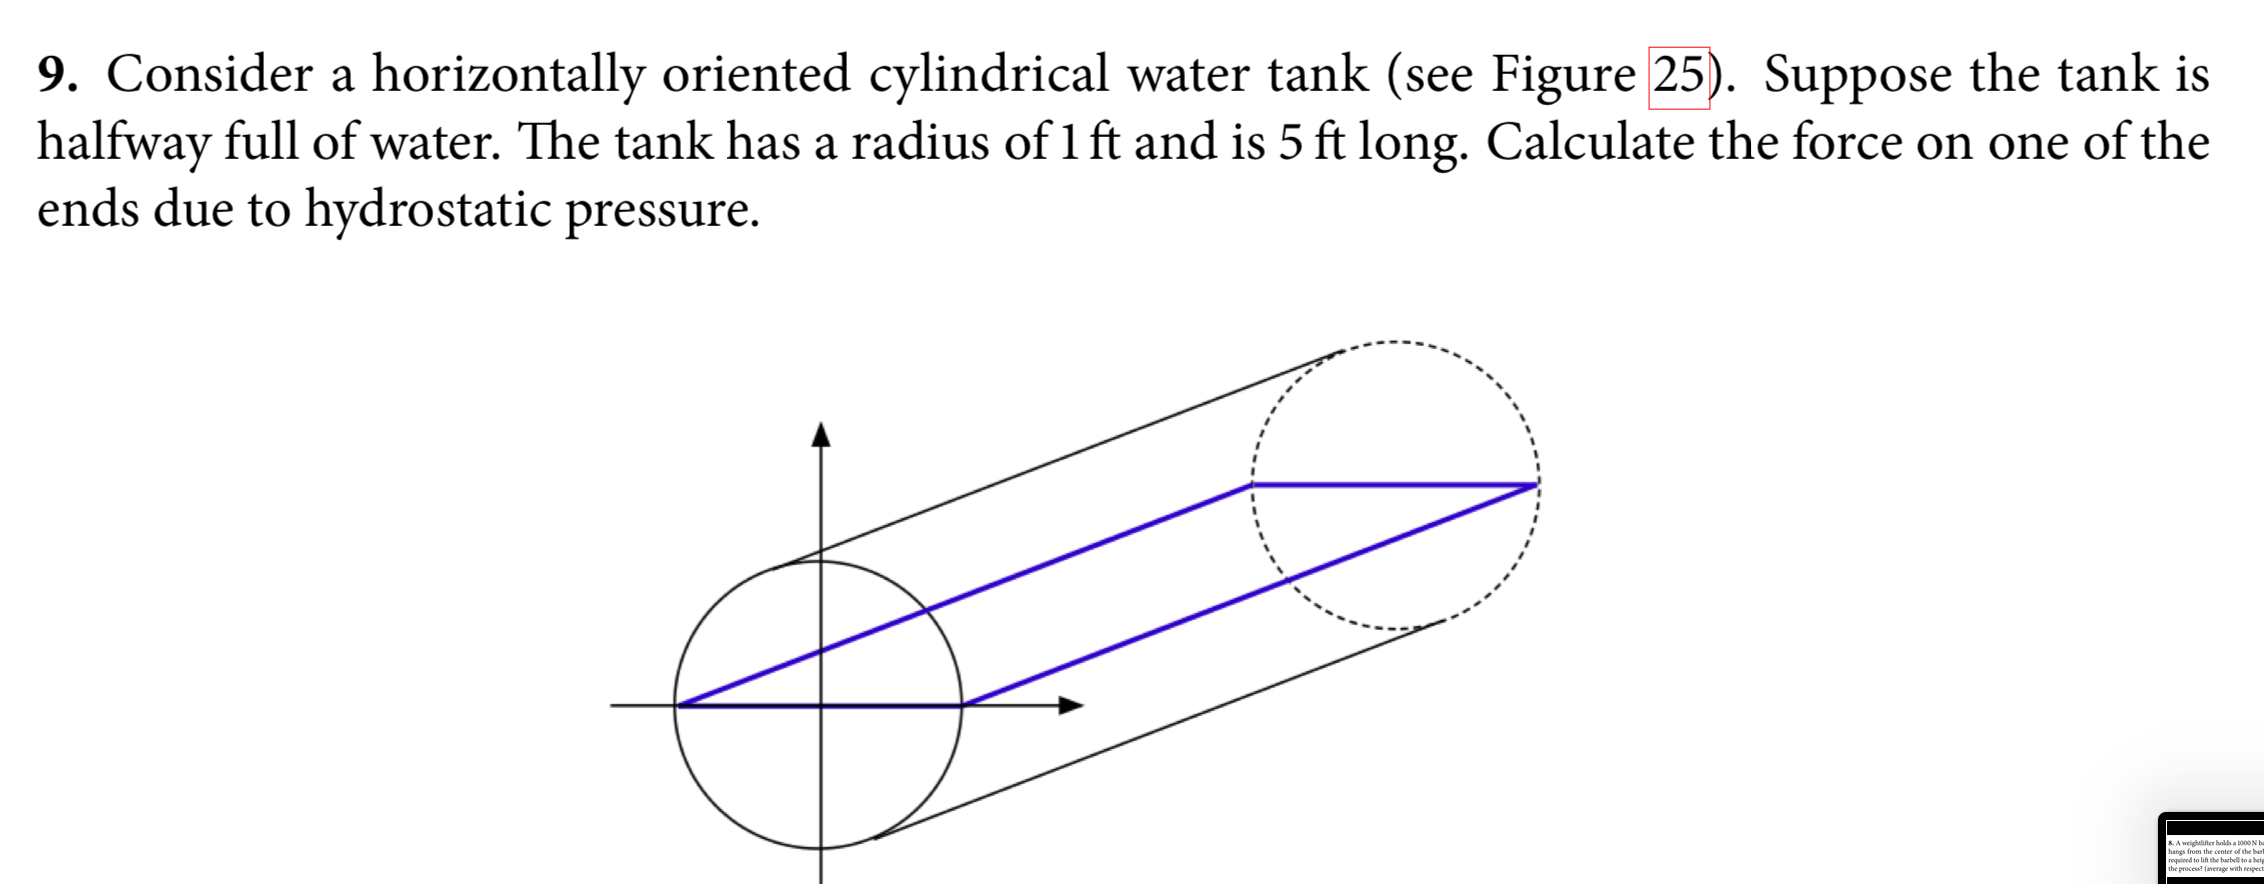 9. Consider a horizontally oriented cylindrical water tank (see Figure 25). Suppose the tank is
halfway full of water. The tank has a radius of 1 ft and is 5 ft long. Calculate the force on one of the
ends due to hydrostatic pressure.
& A weightlifter holds a 1000N b
hangs from the center of the bart
required to lift the barbell to a heip
the process?
with respect
